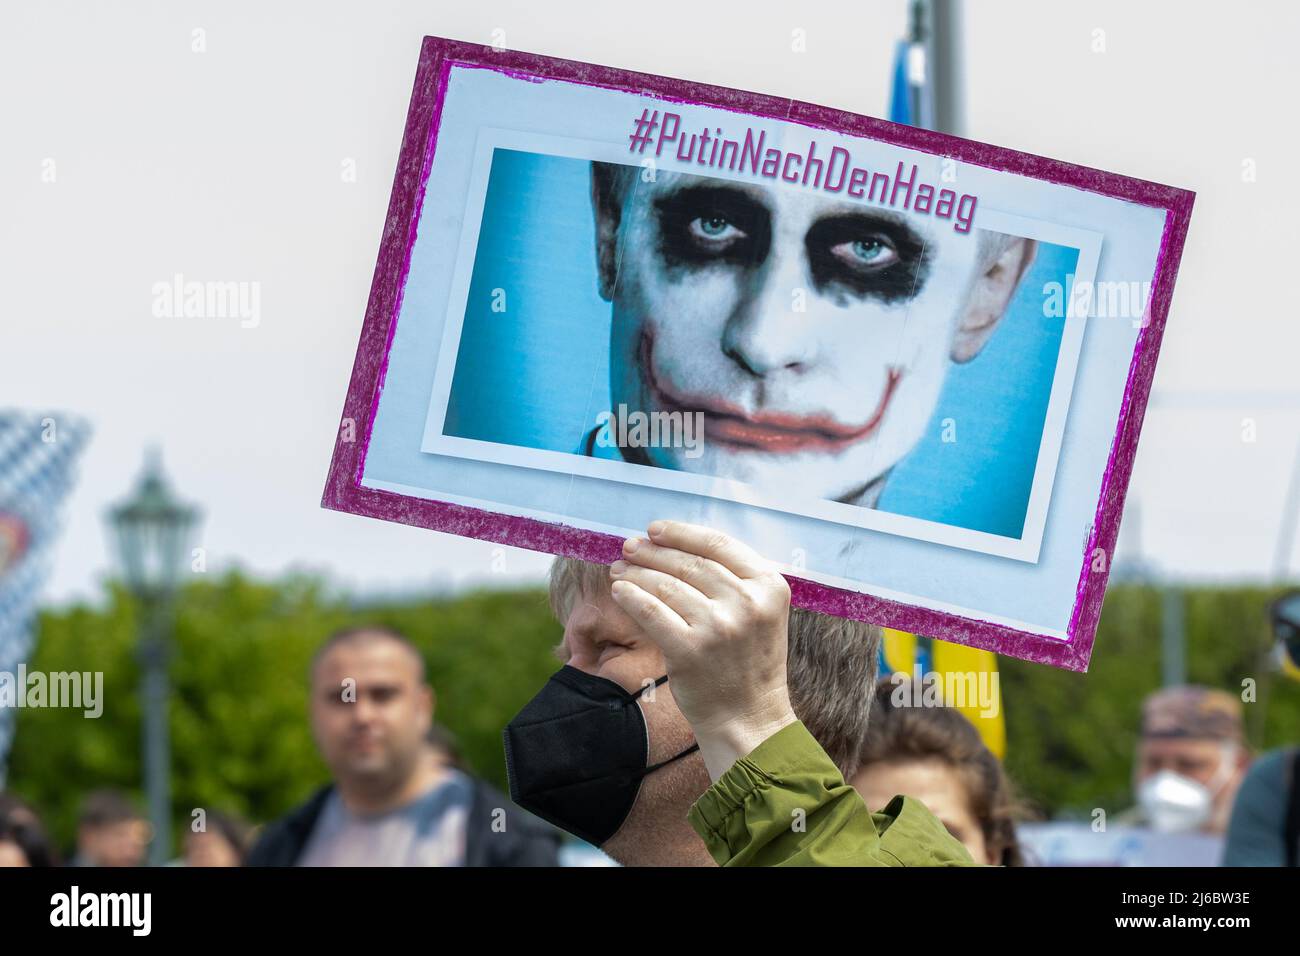 30 April 2022, Saxony, Dresden: A man holds up a sign with President Putin and the hashtag '#PutinNachDenHaag' at a counter-event against a pro-Russian rally entitled: 'Solidarity with the people of Ukraine! All together against Putin's war of aggression!' a sign with President Putin and the hashtag '#PutinNachDenHaag' in the air. Photo: Daniel Schäfer/dpa Stock Photo